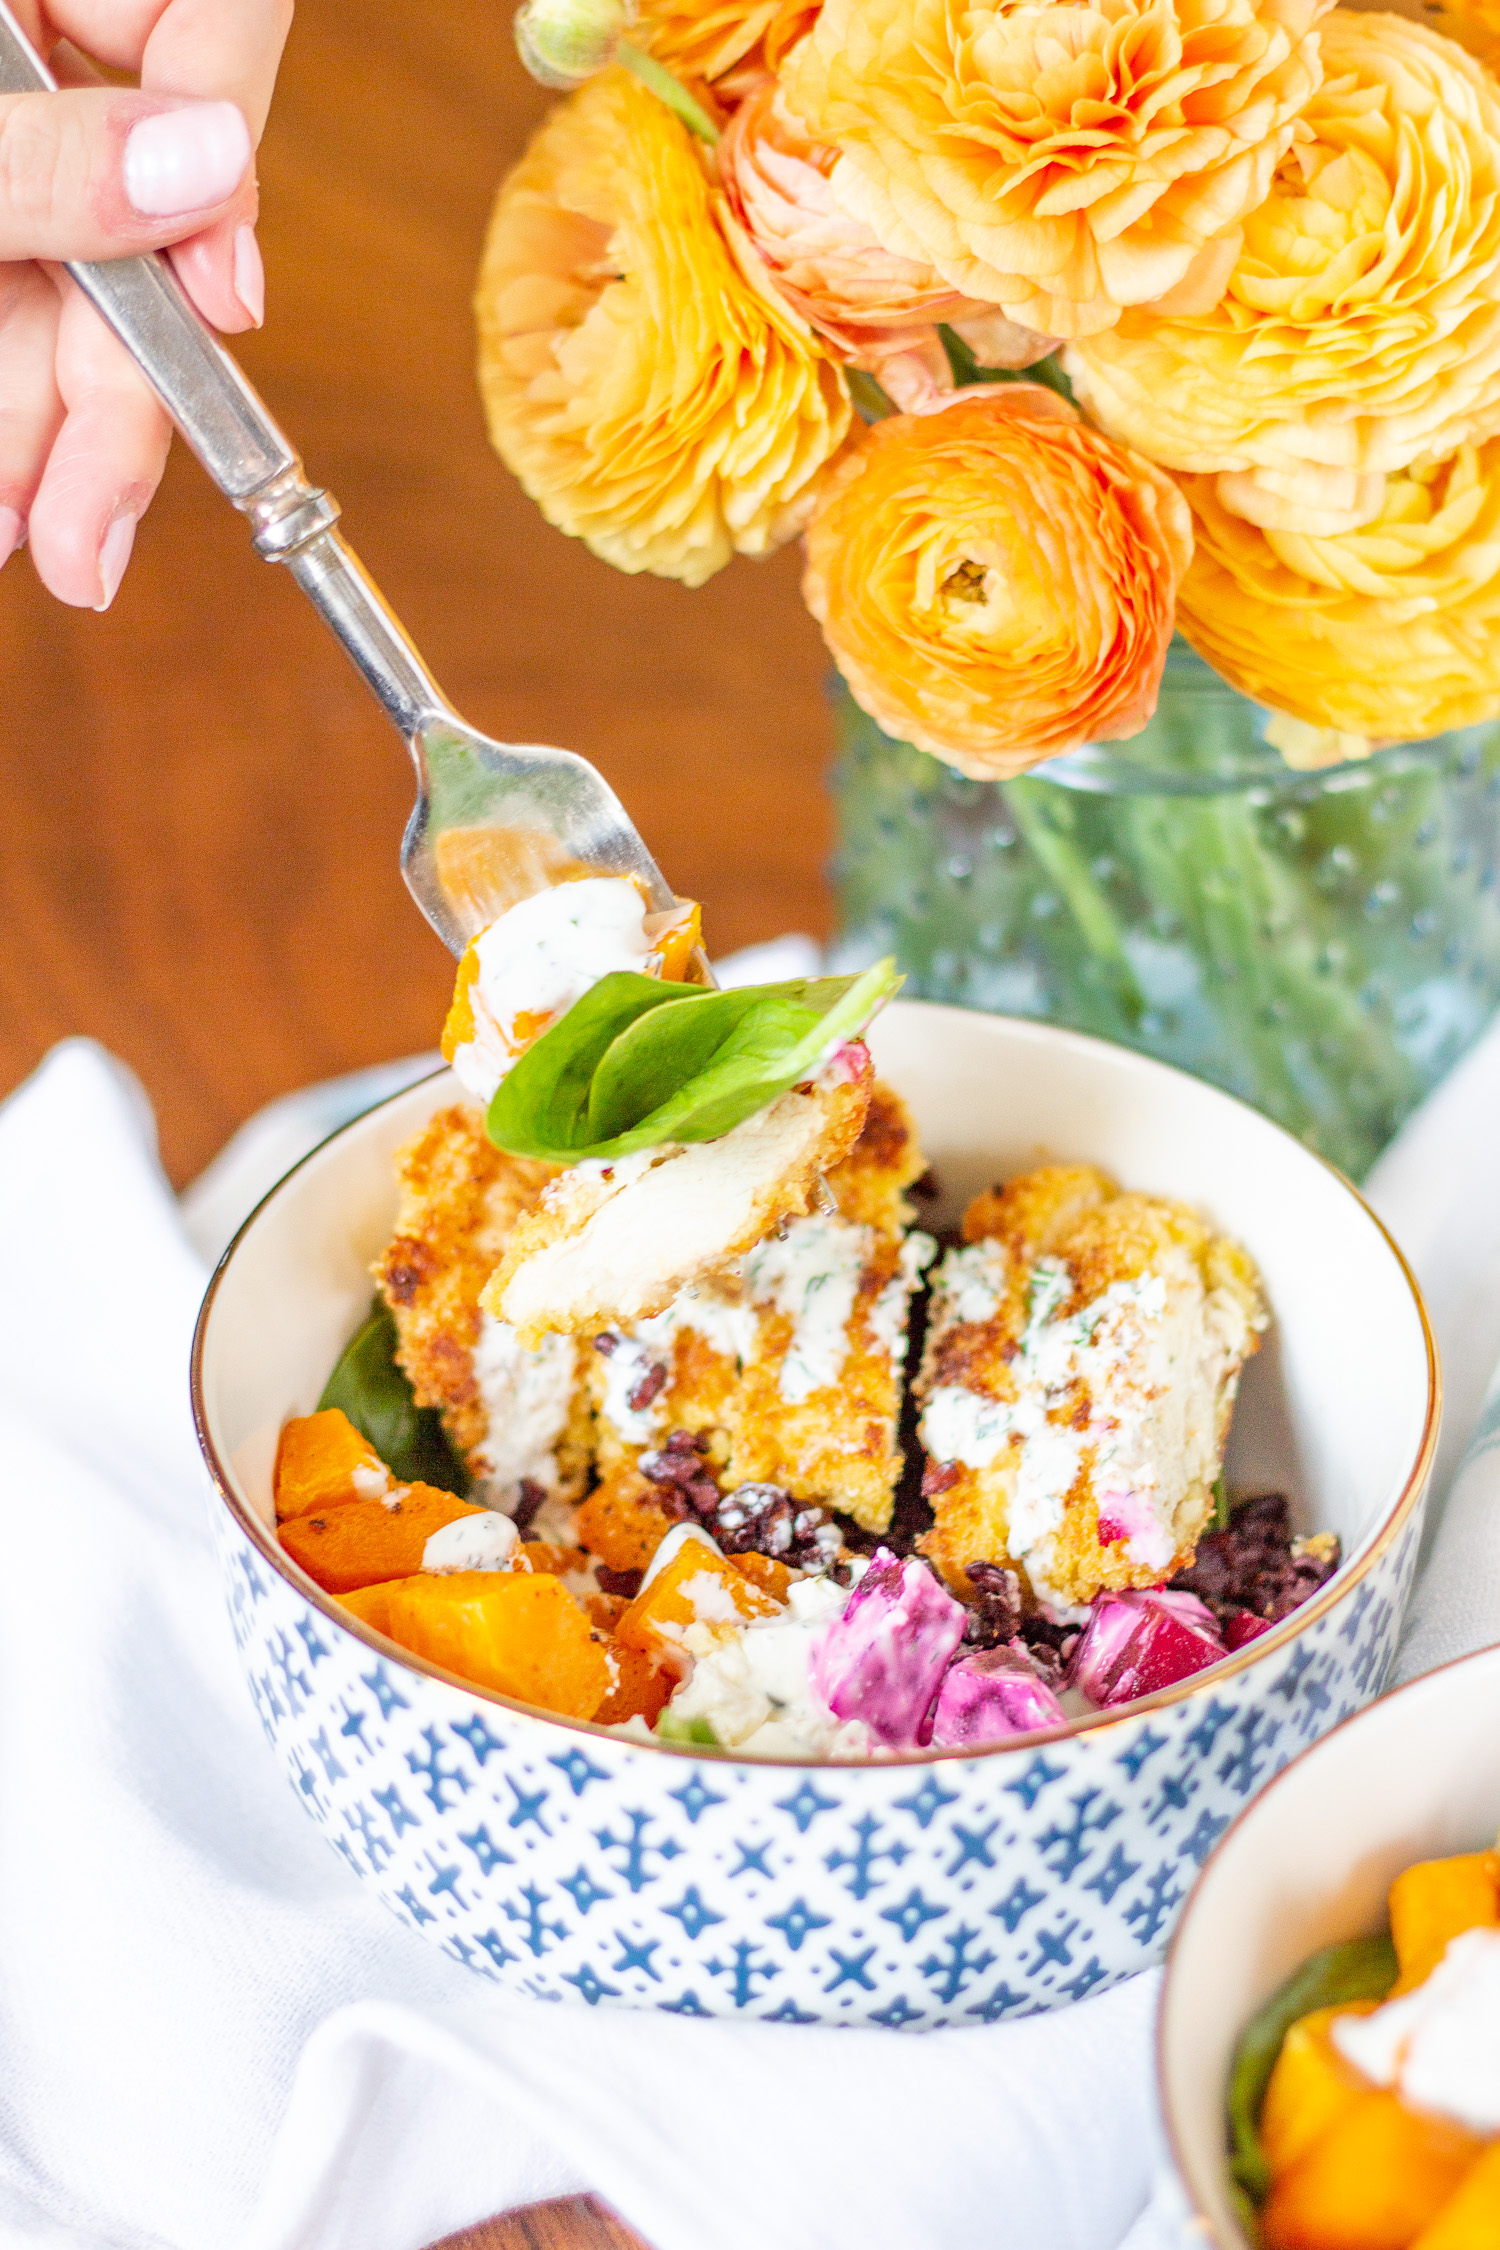 Superfood Salad Bowls with Crispy Chicken - A Healthy Meal Prep Recipe